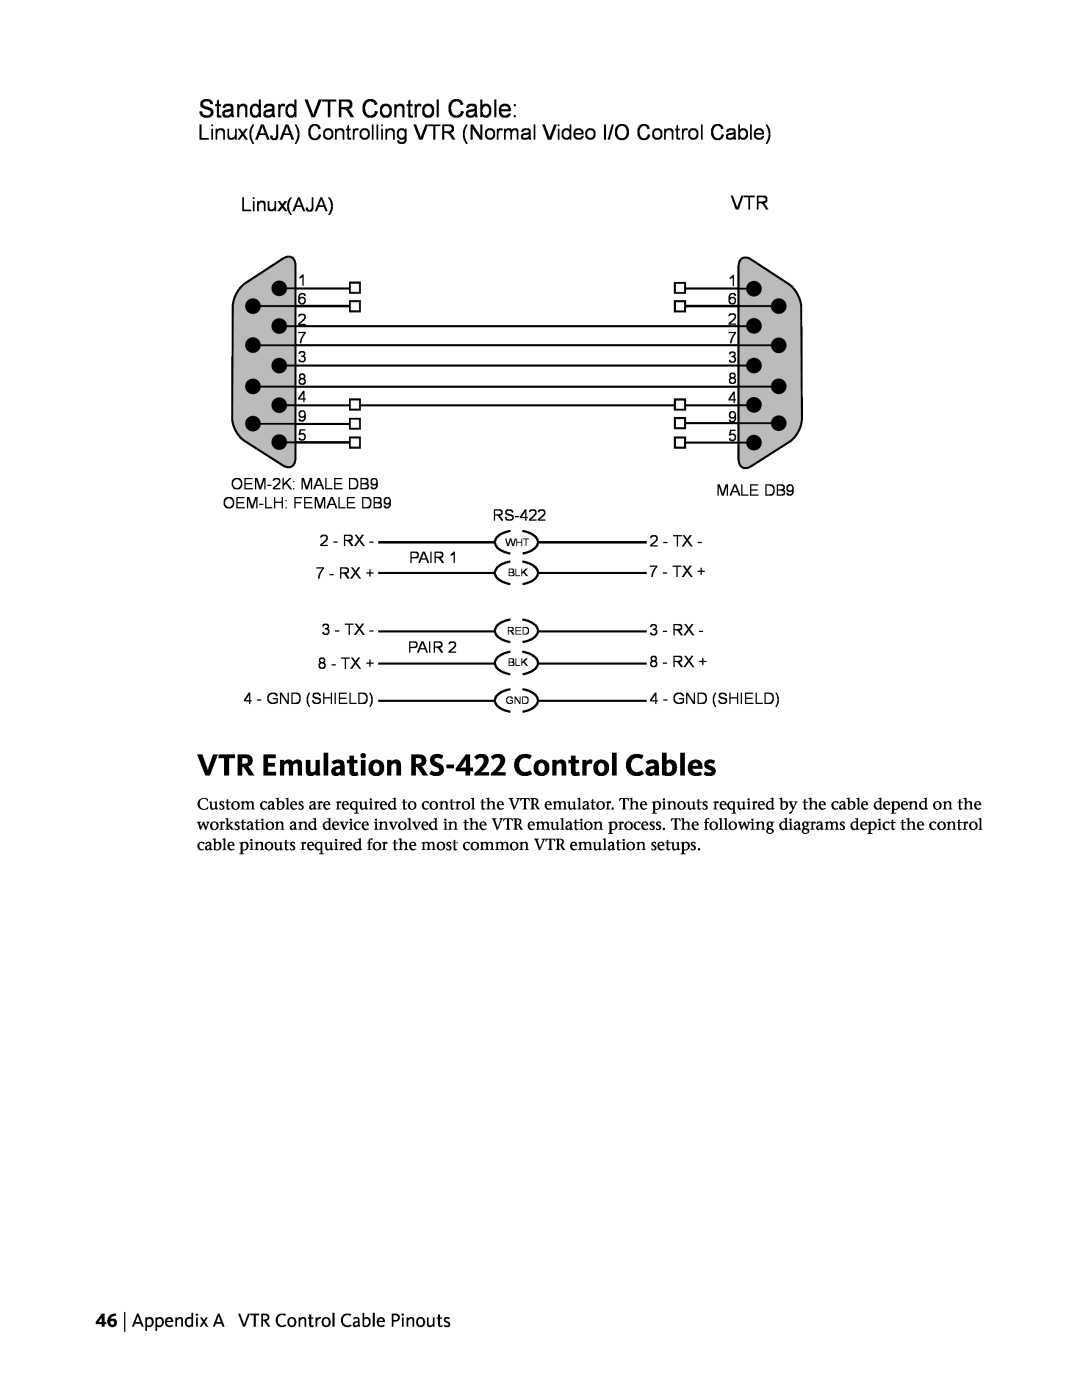 HP Z800 manual VTR Emulation RS-422 Control Cables, LinuxAJA Controlling VTR Normal Video I/O Control Cable 